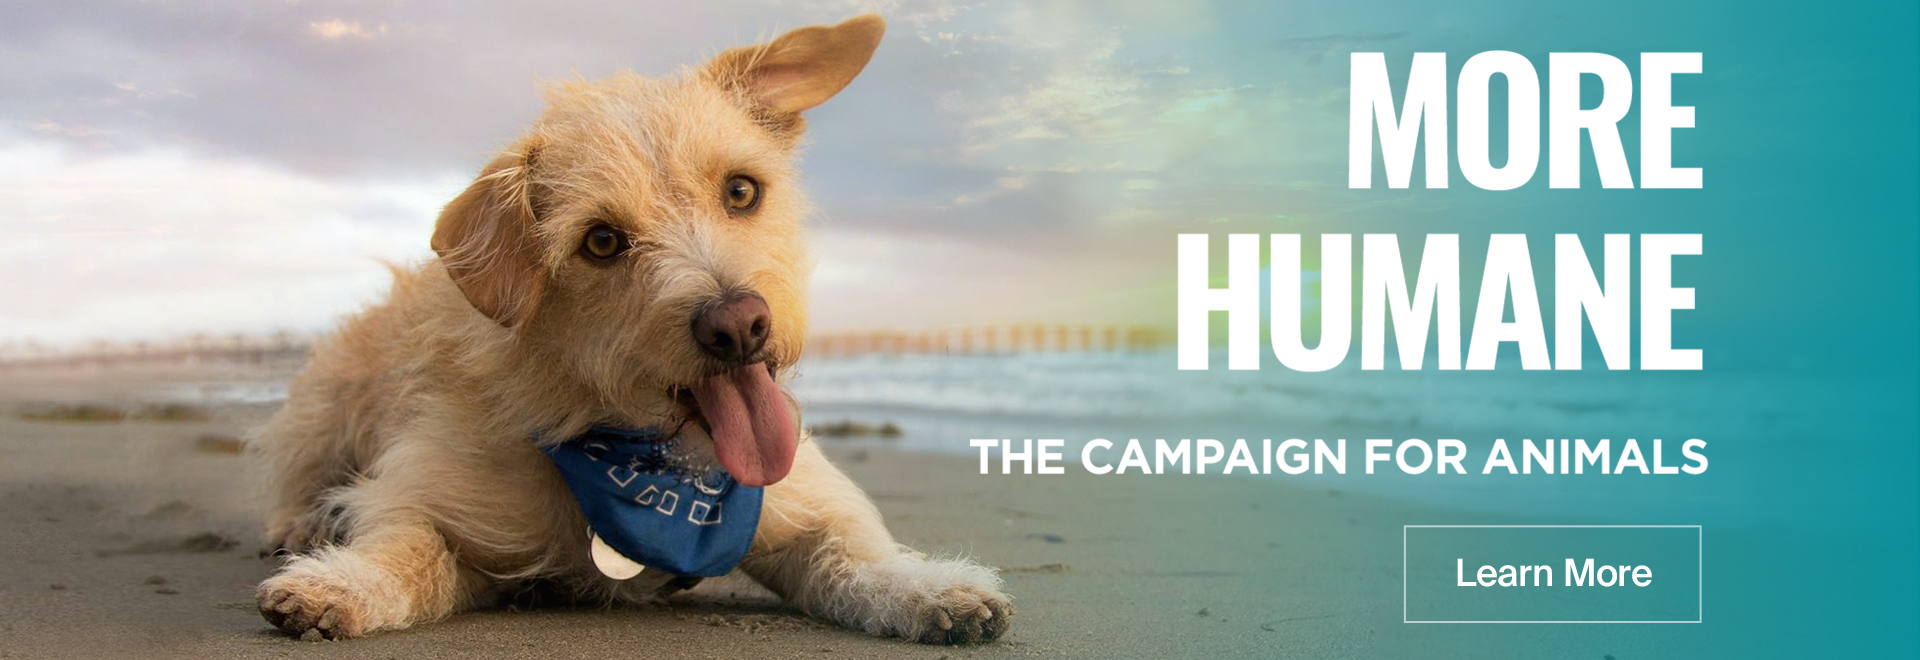 More Humane: The Campaign for Animals